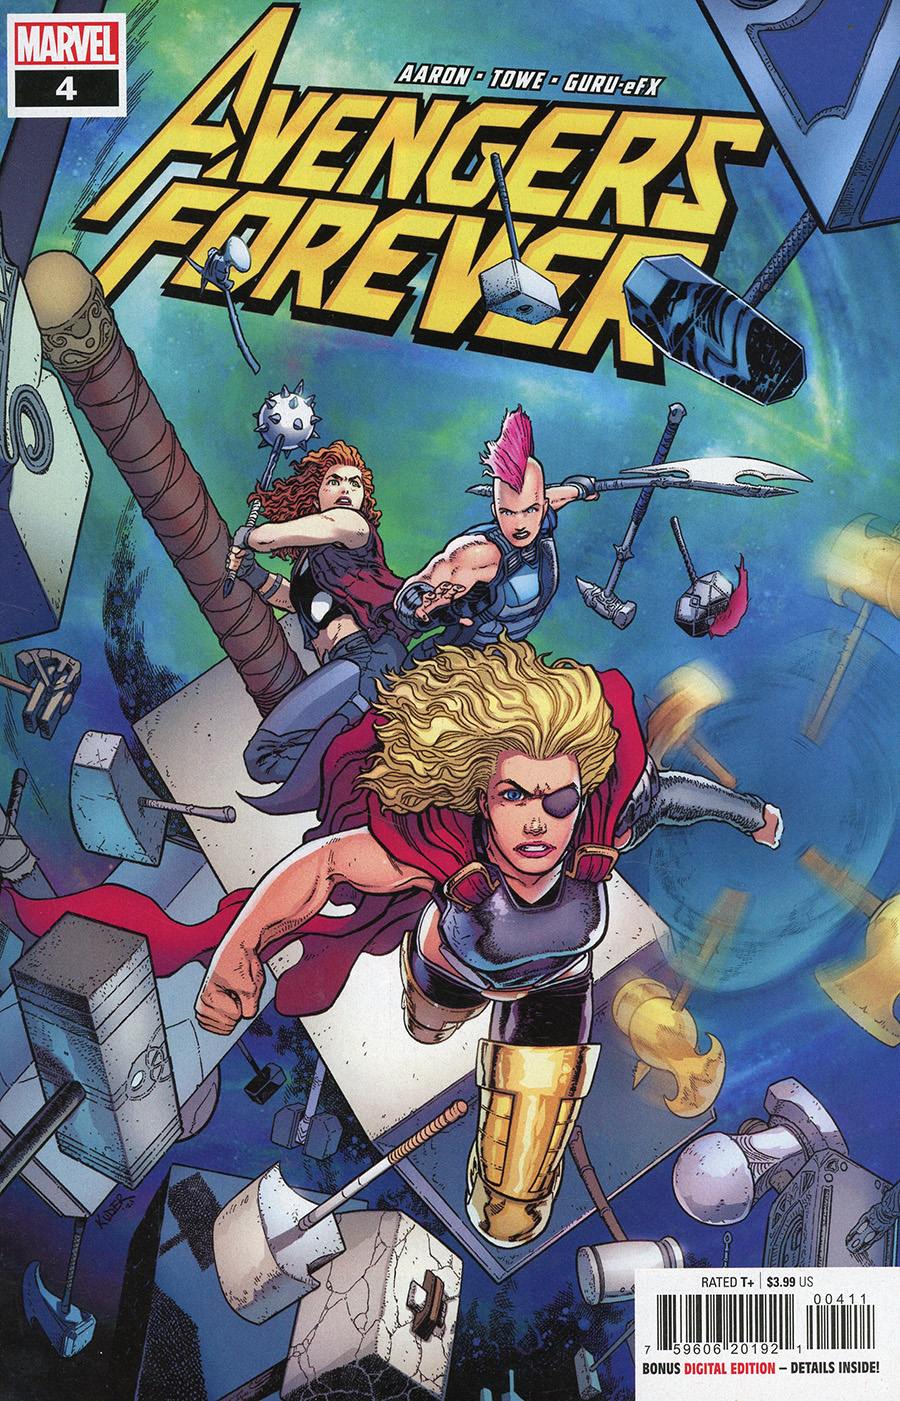 Avengers Forever Vol 2 #4 Cover A Regular Aaron Kuder Cover (Limit 1 Per Customer)